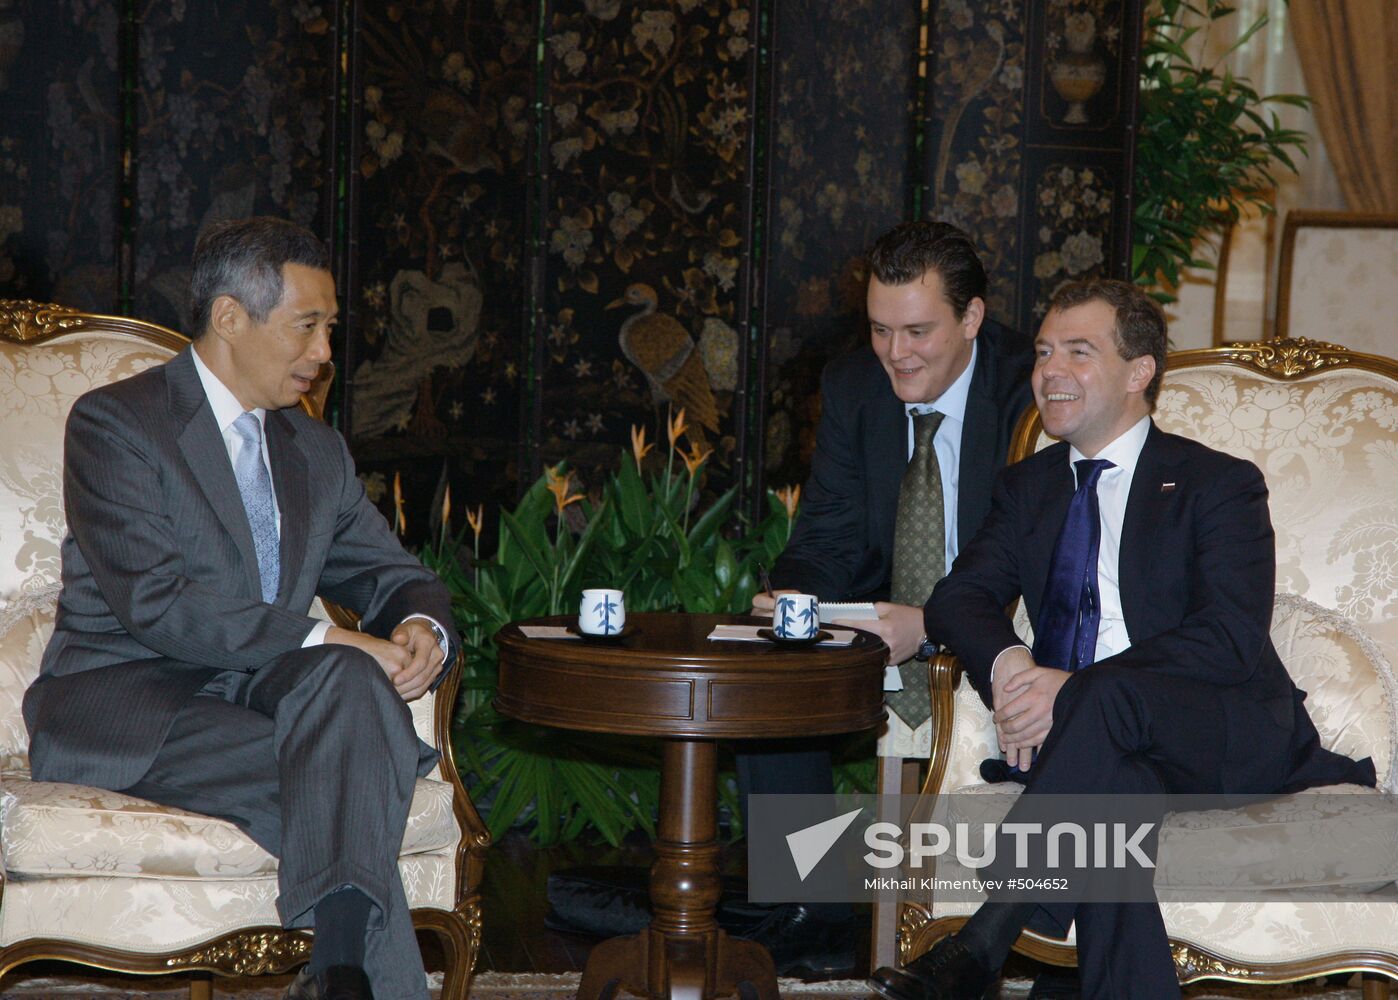 Dmitry Medvedev's first official visit to Singapore. Second day